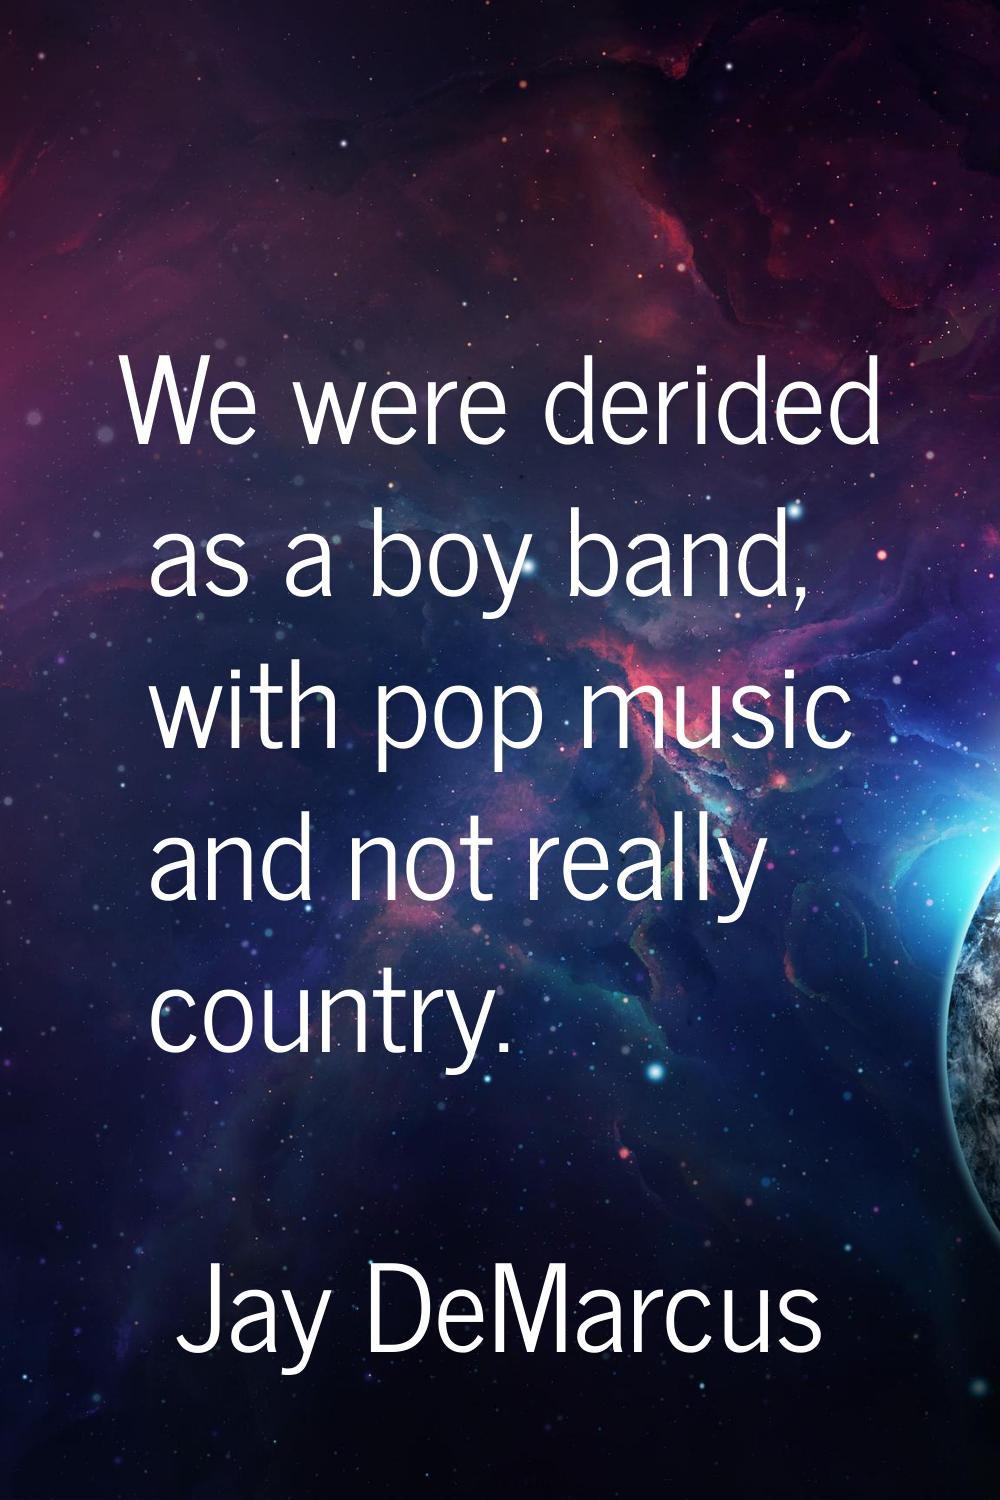 We were derided as a boy band, with pop music and not really country.